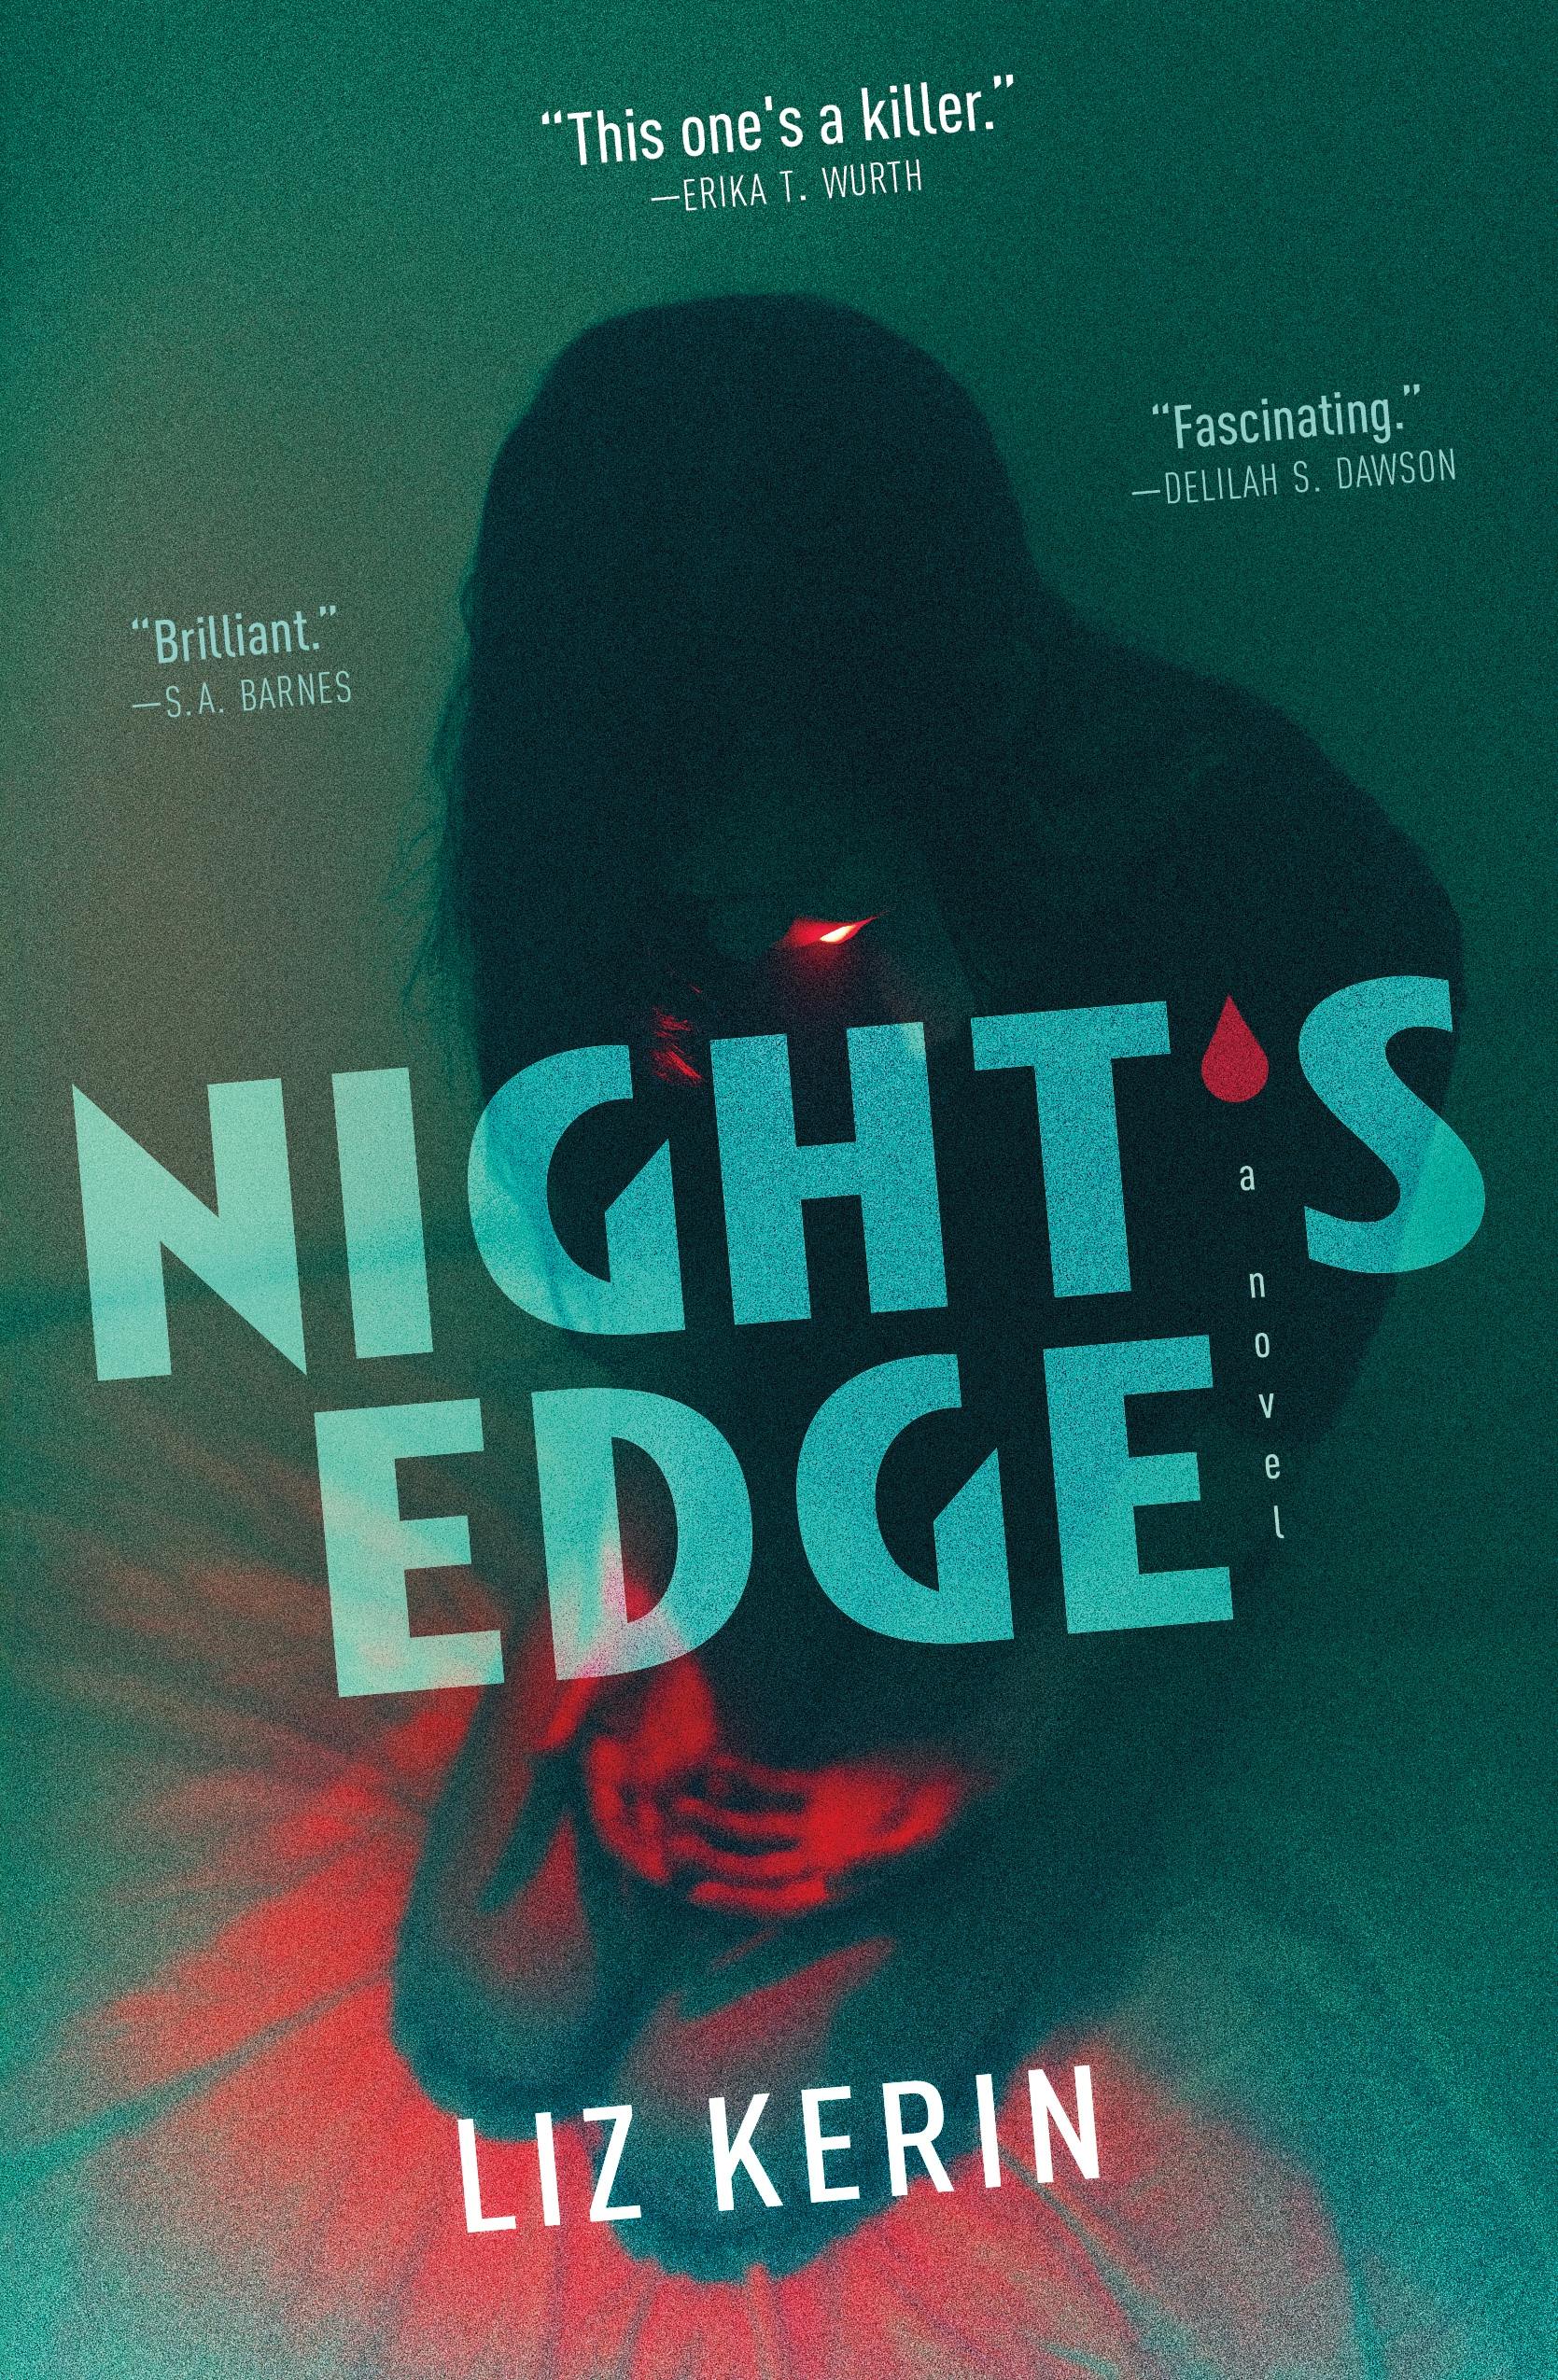 Cover for the book titled as: Night's Edge